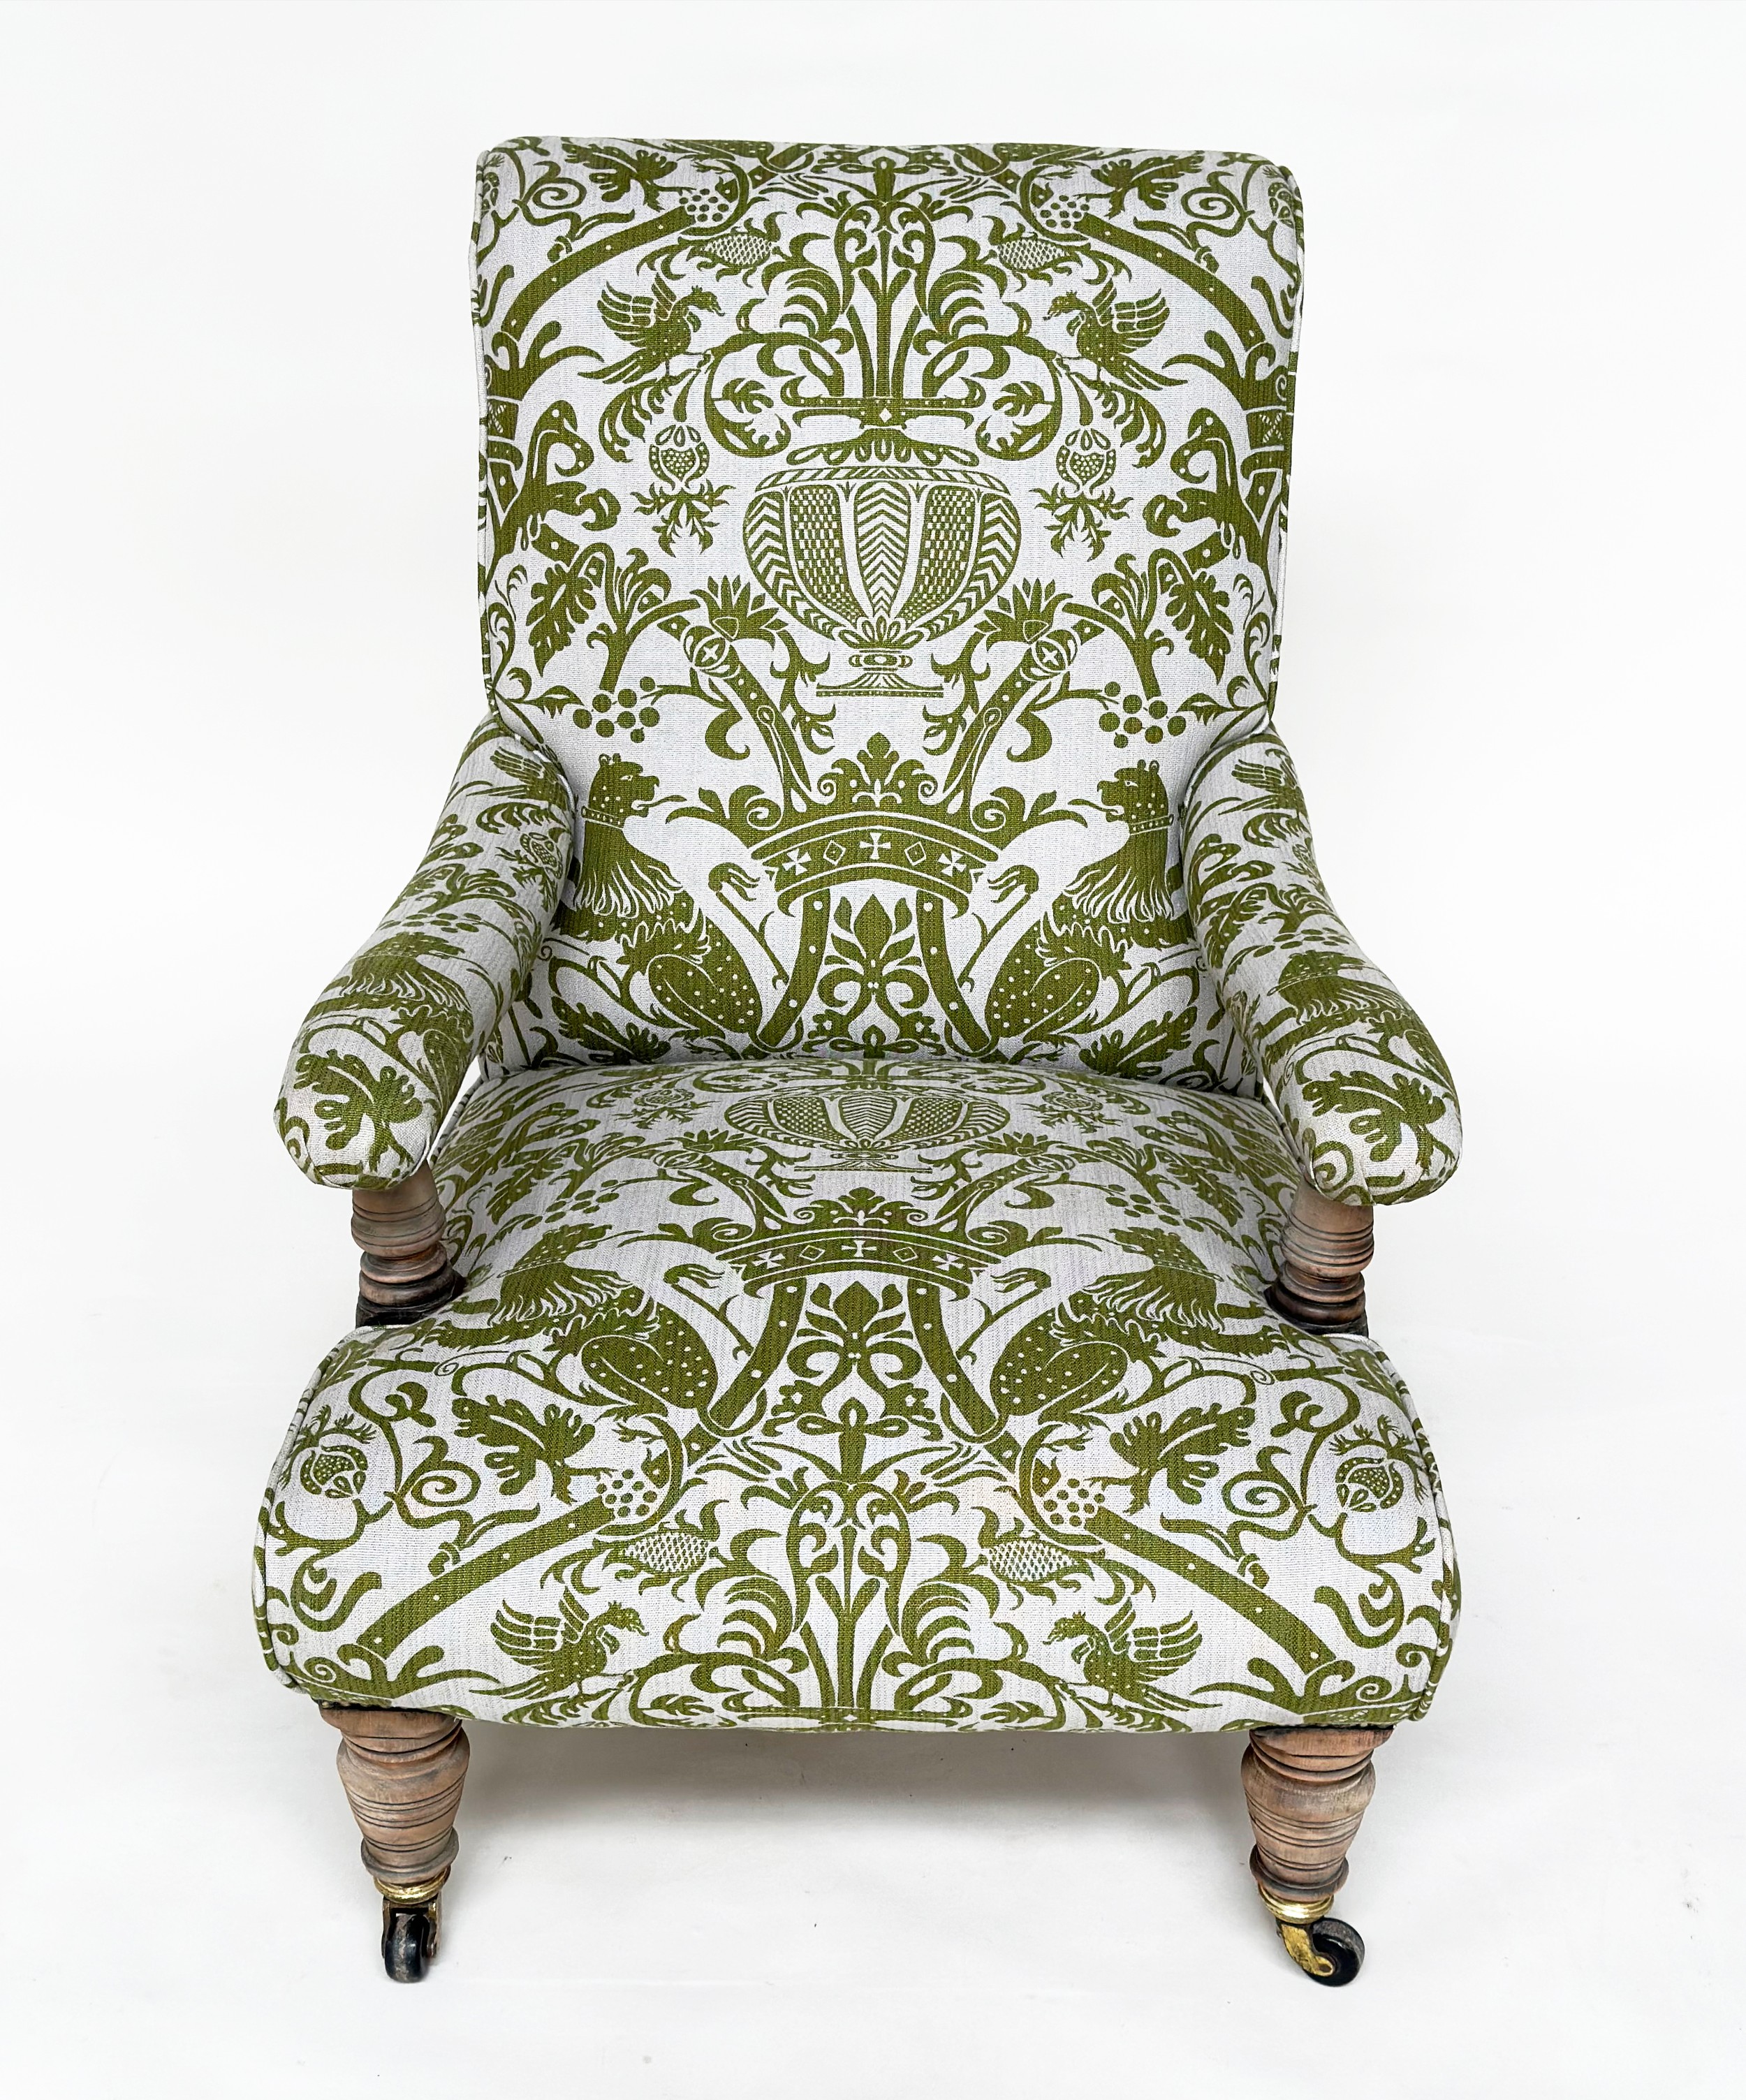 LIBRARY ARMCHAIR, Howard style late 19th century walnut, in the manner of Shoolbred with heraldic - Image 5 of 7